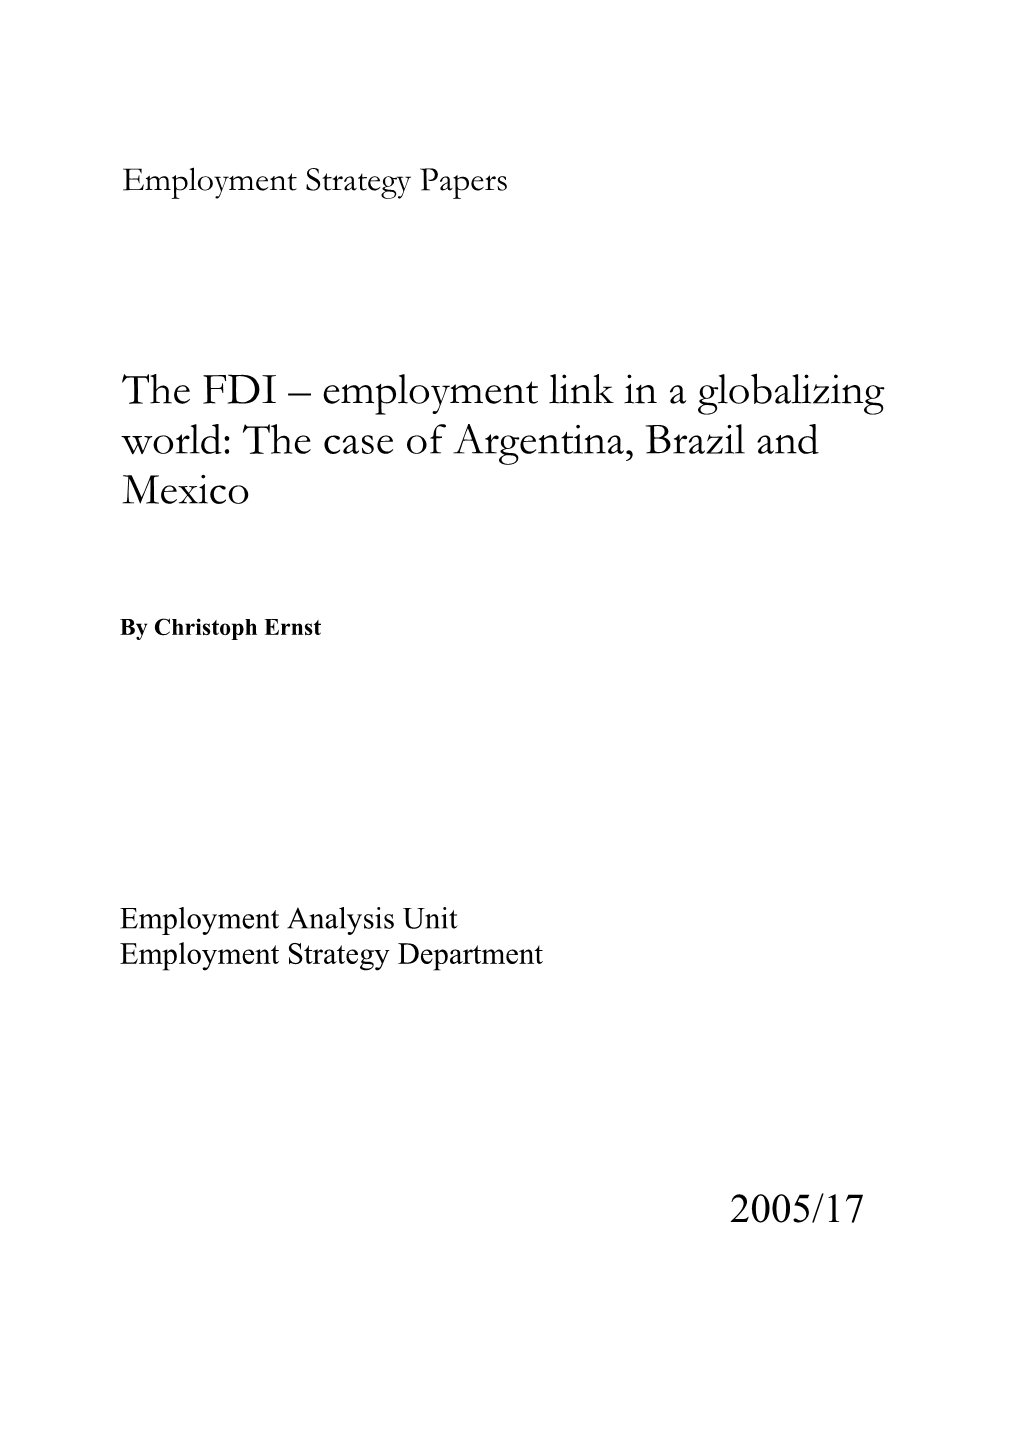 The FDI – Employment Link in a Globalizing World: the Case of Argentina, Brazil and Mexico